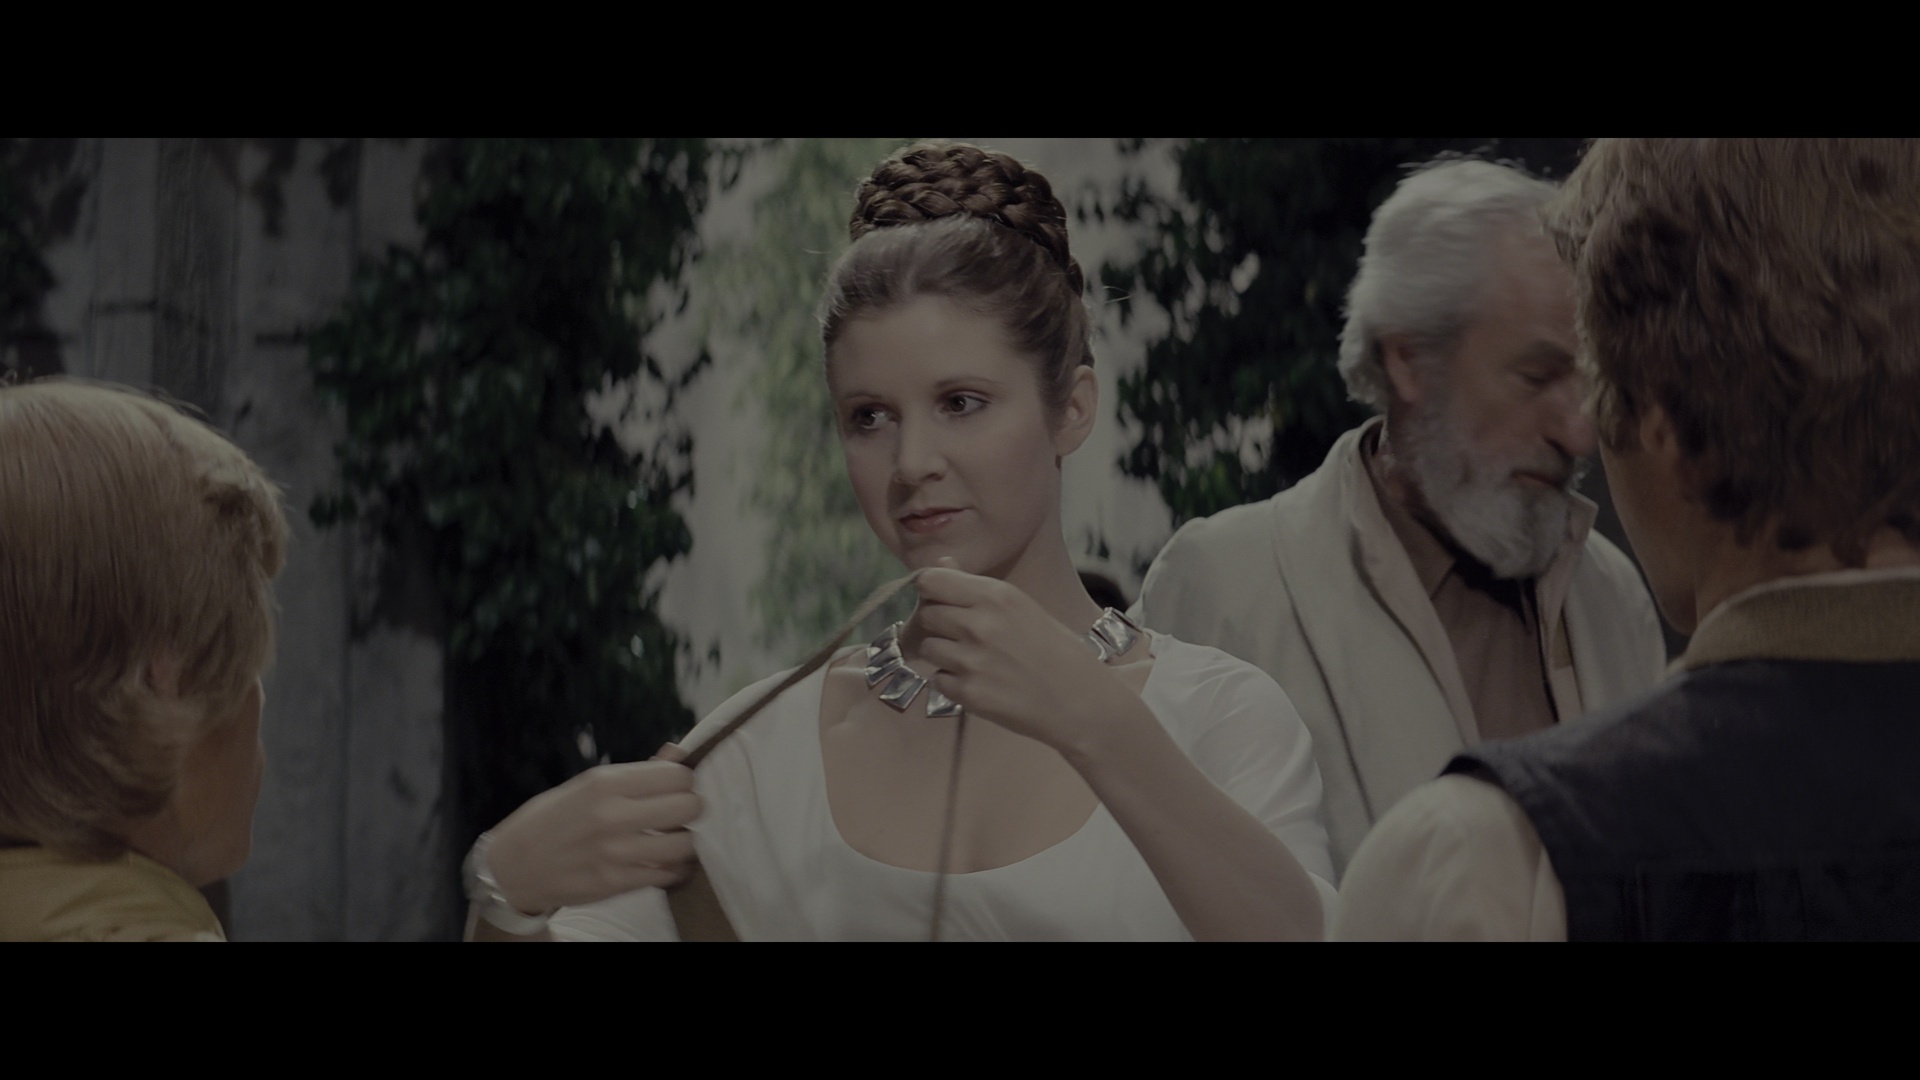 STAR WARS: A NEW HOPE (1977) - Princess Leia's (Carrie Fisher) Screen-Matched Ceremonial Dress - Image 36 of 39